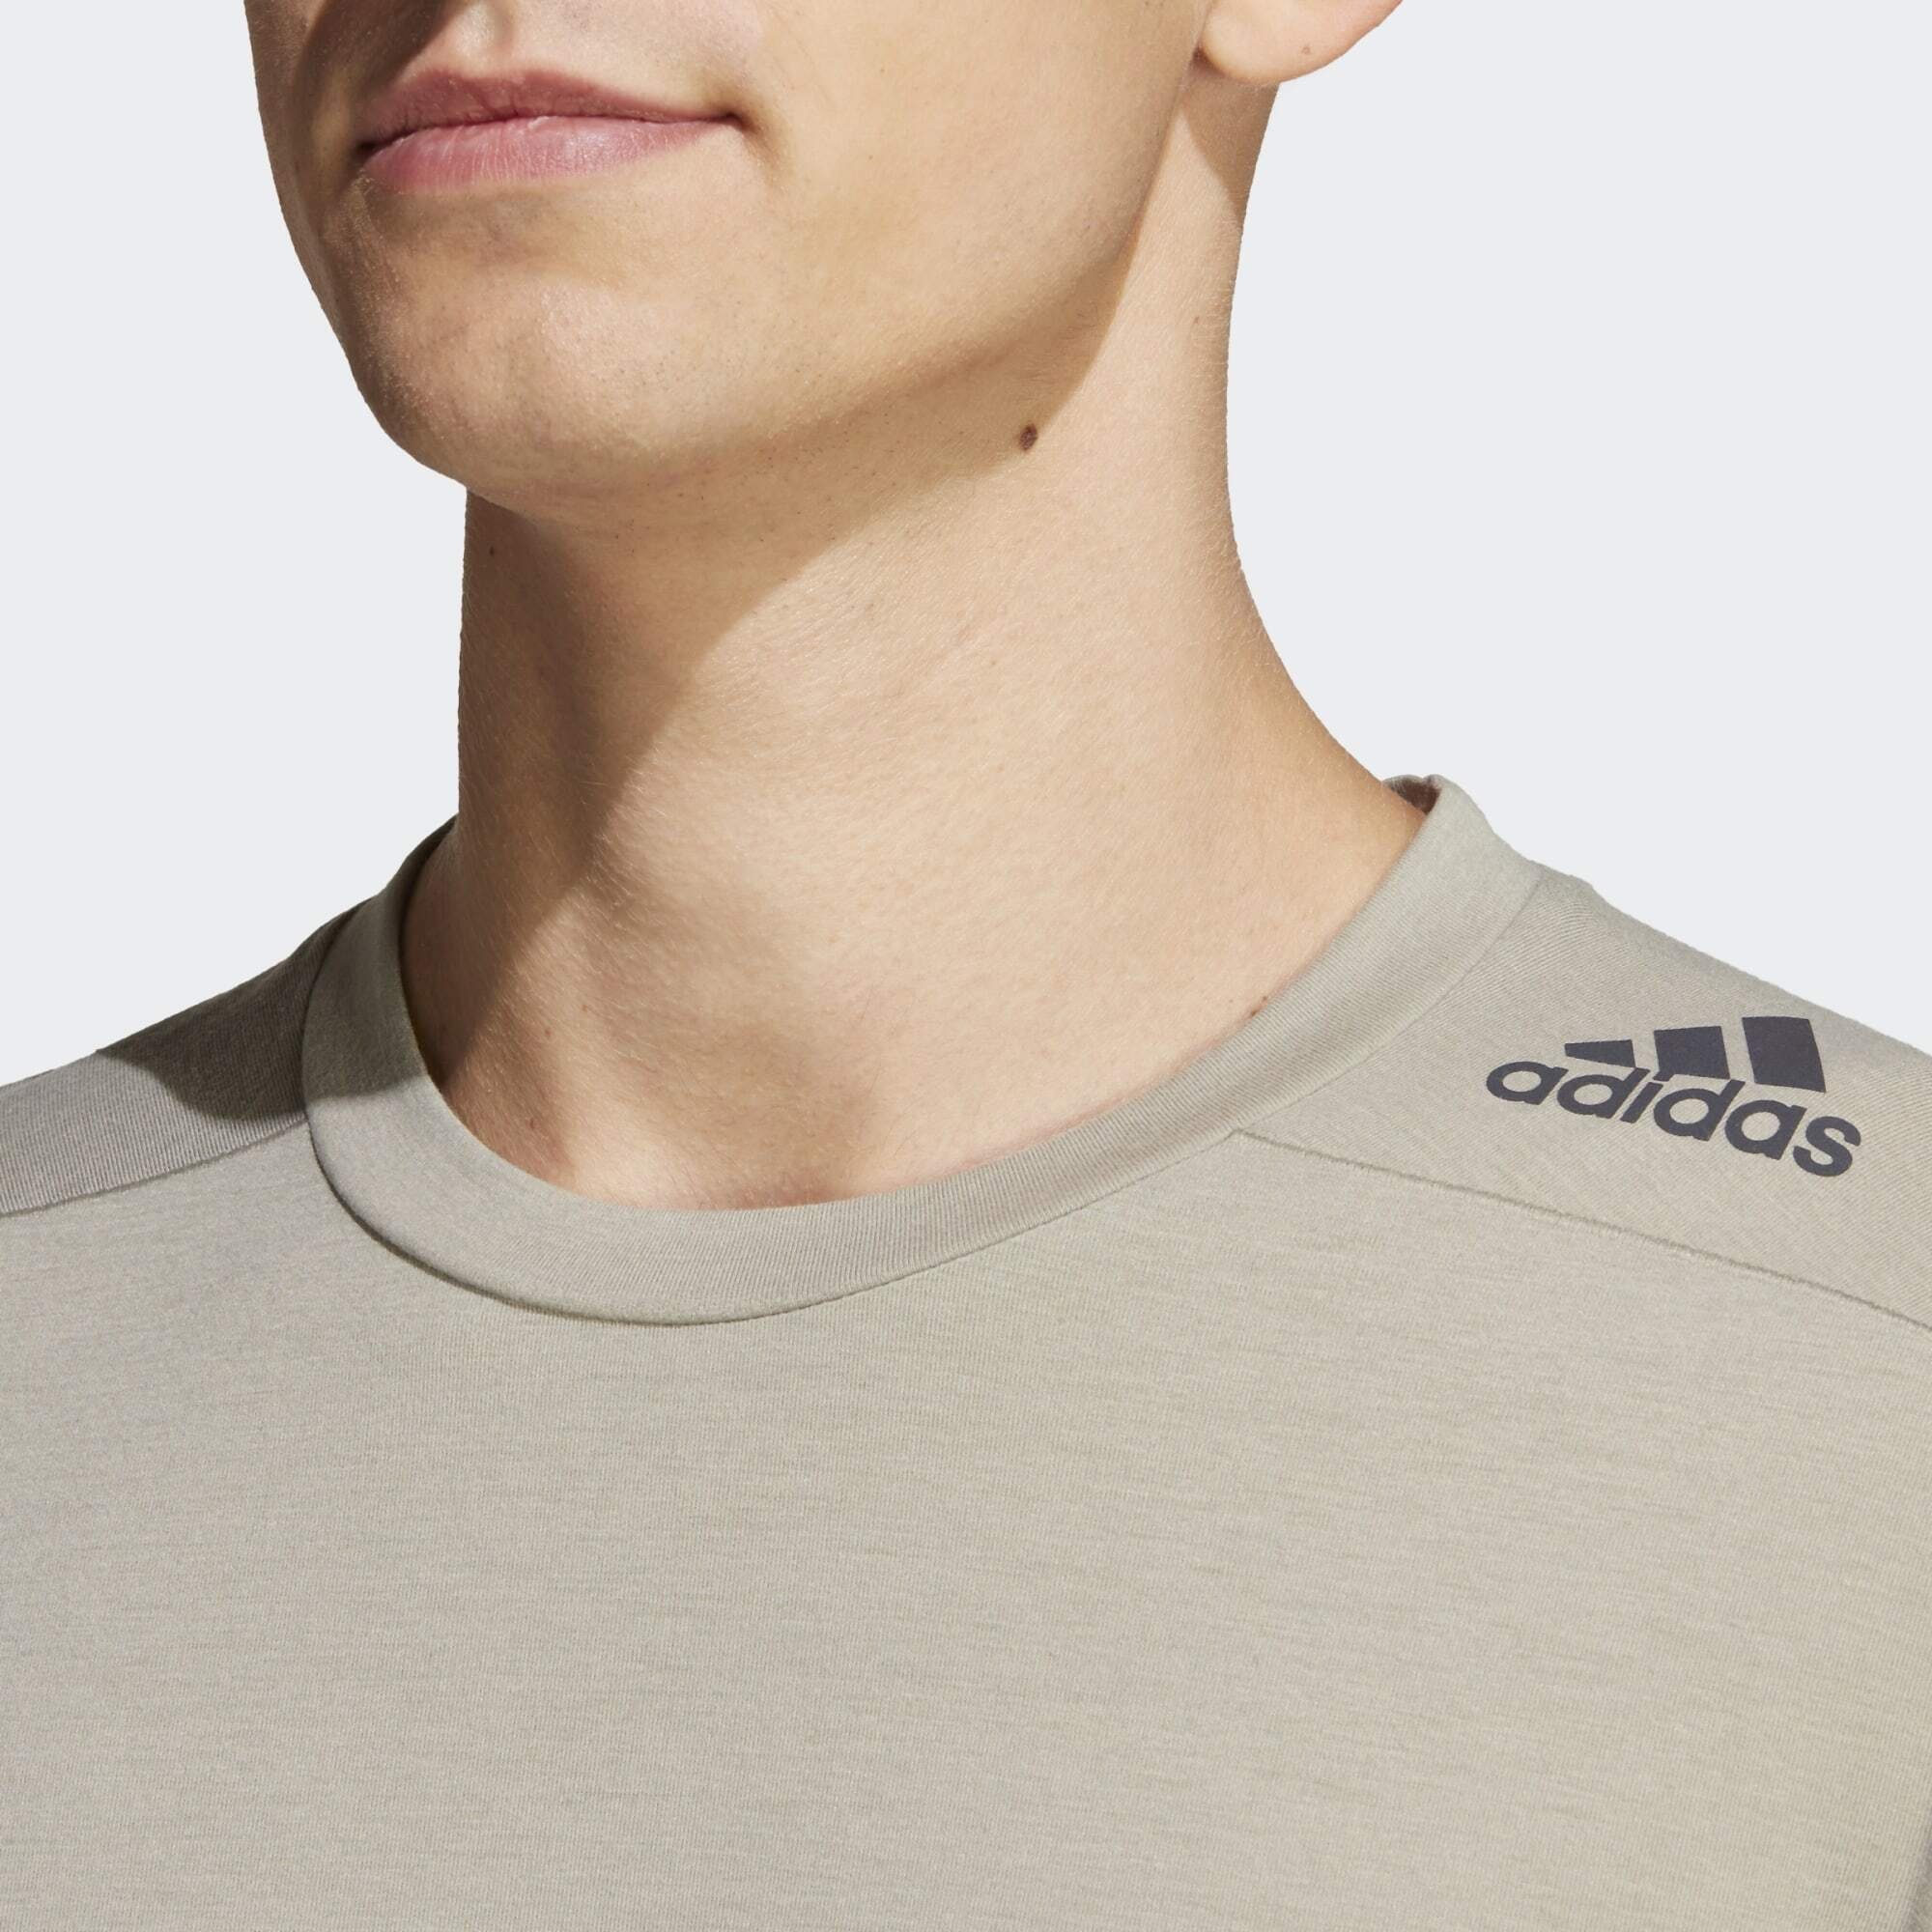 Funktionsshirt T-SHIRT TRAINING adidas FOR Silver DESIGNED Pebble Performance